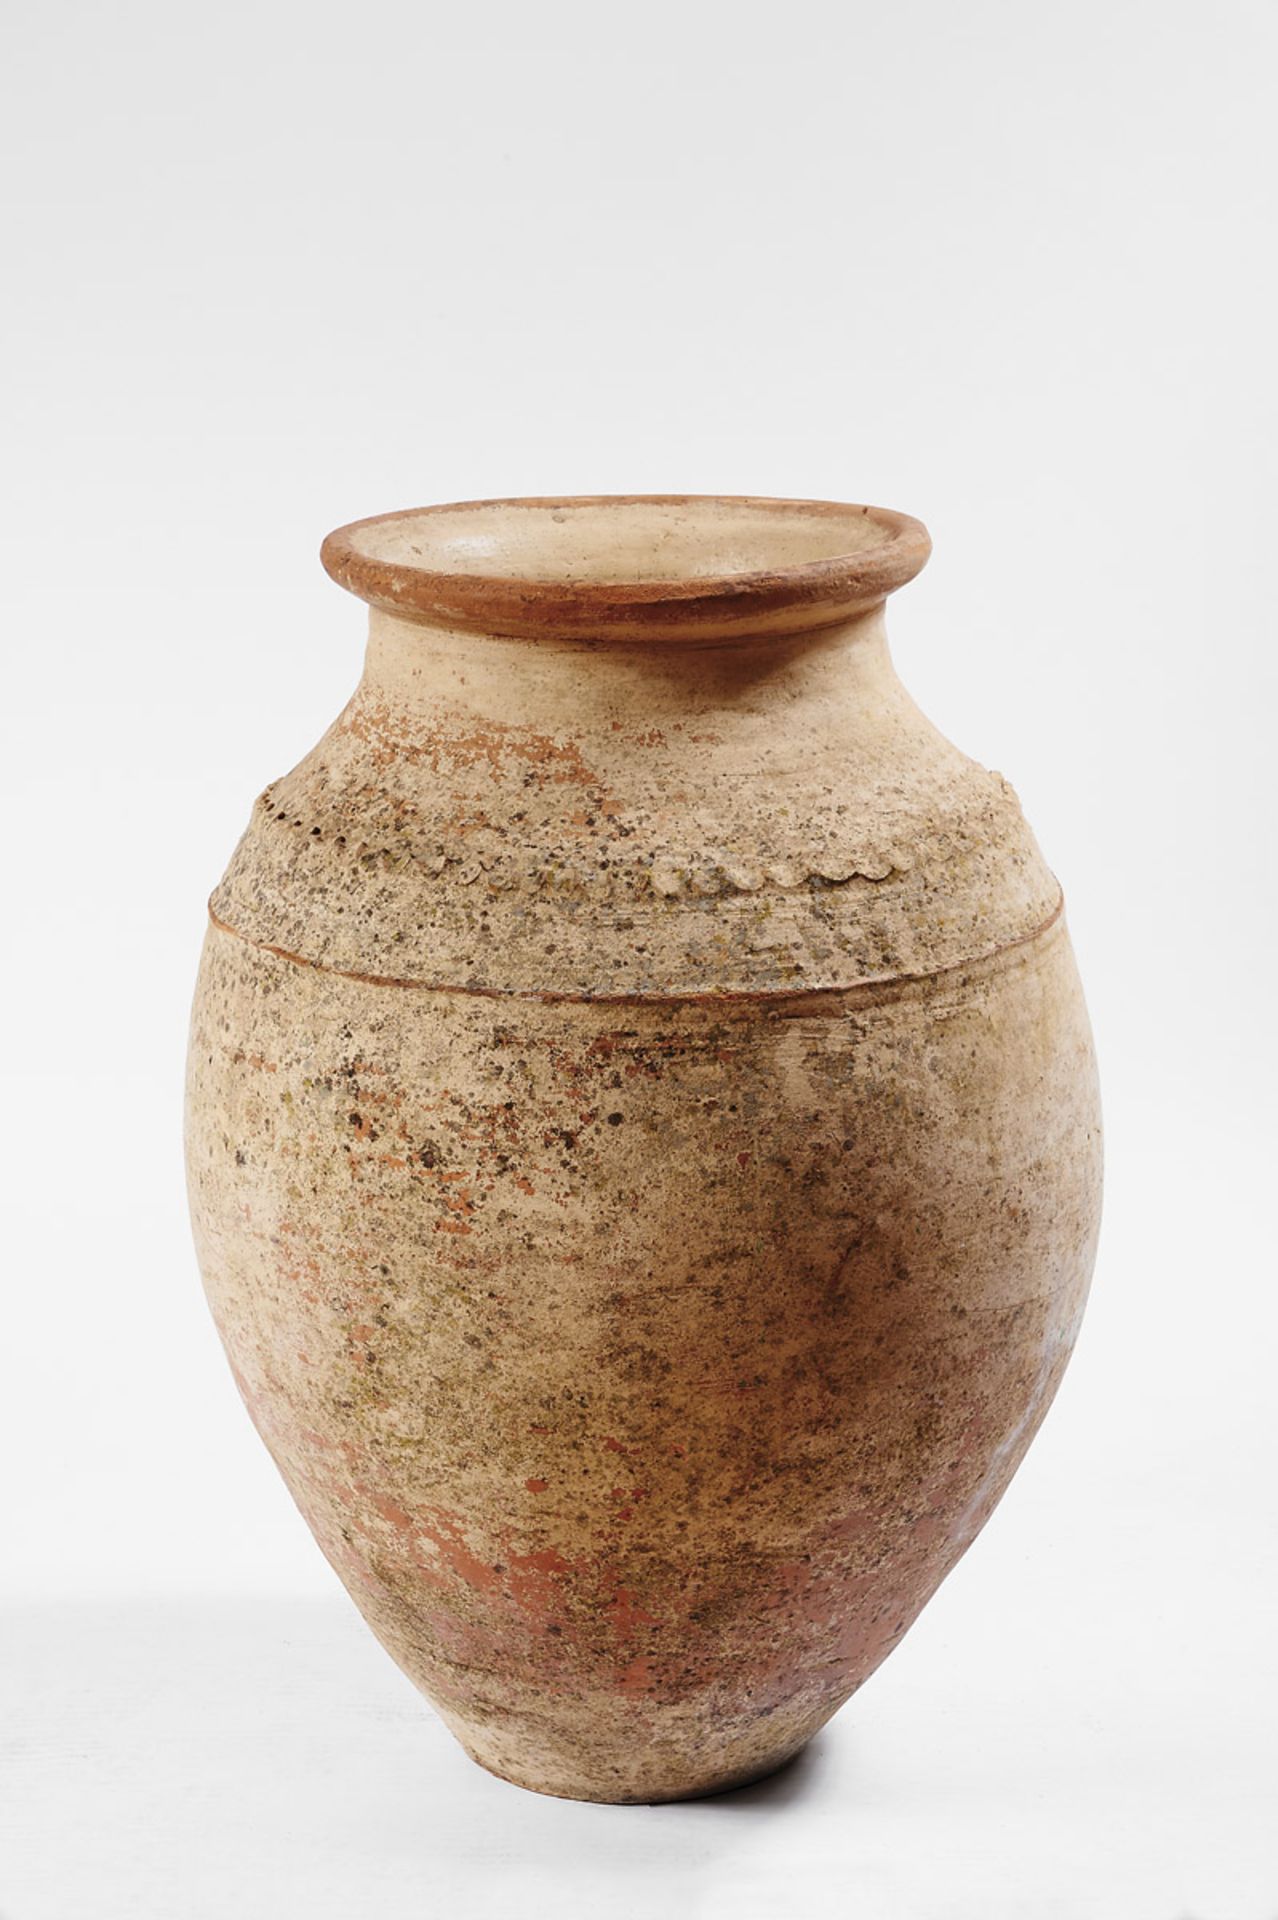 A Pot, clay, Portuguese, 19th C., signs of use, small defects, Dim. - 85,5 cm